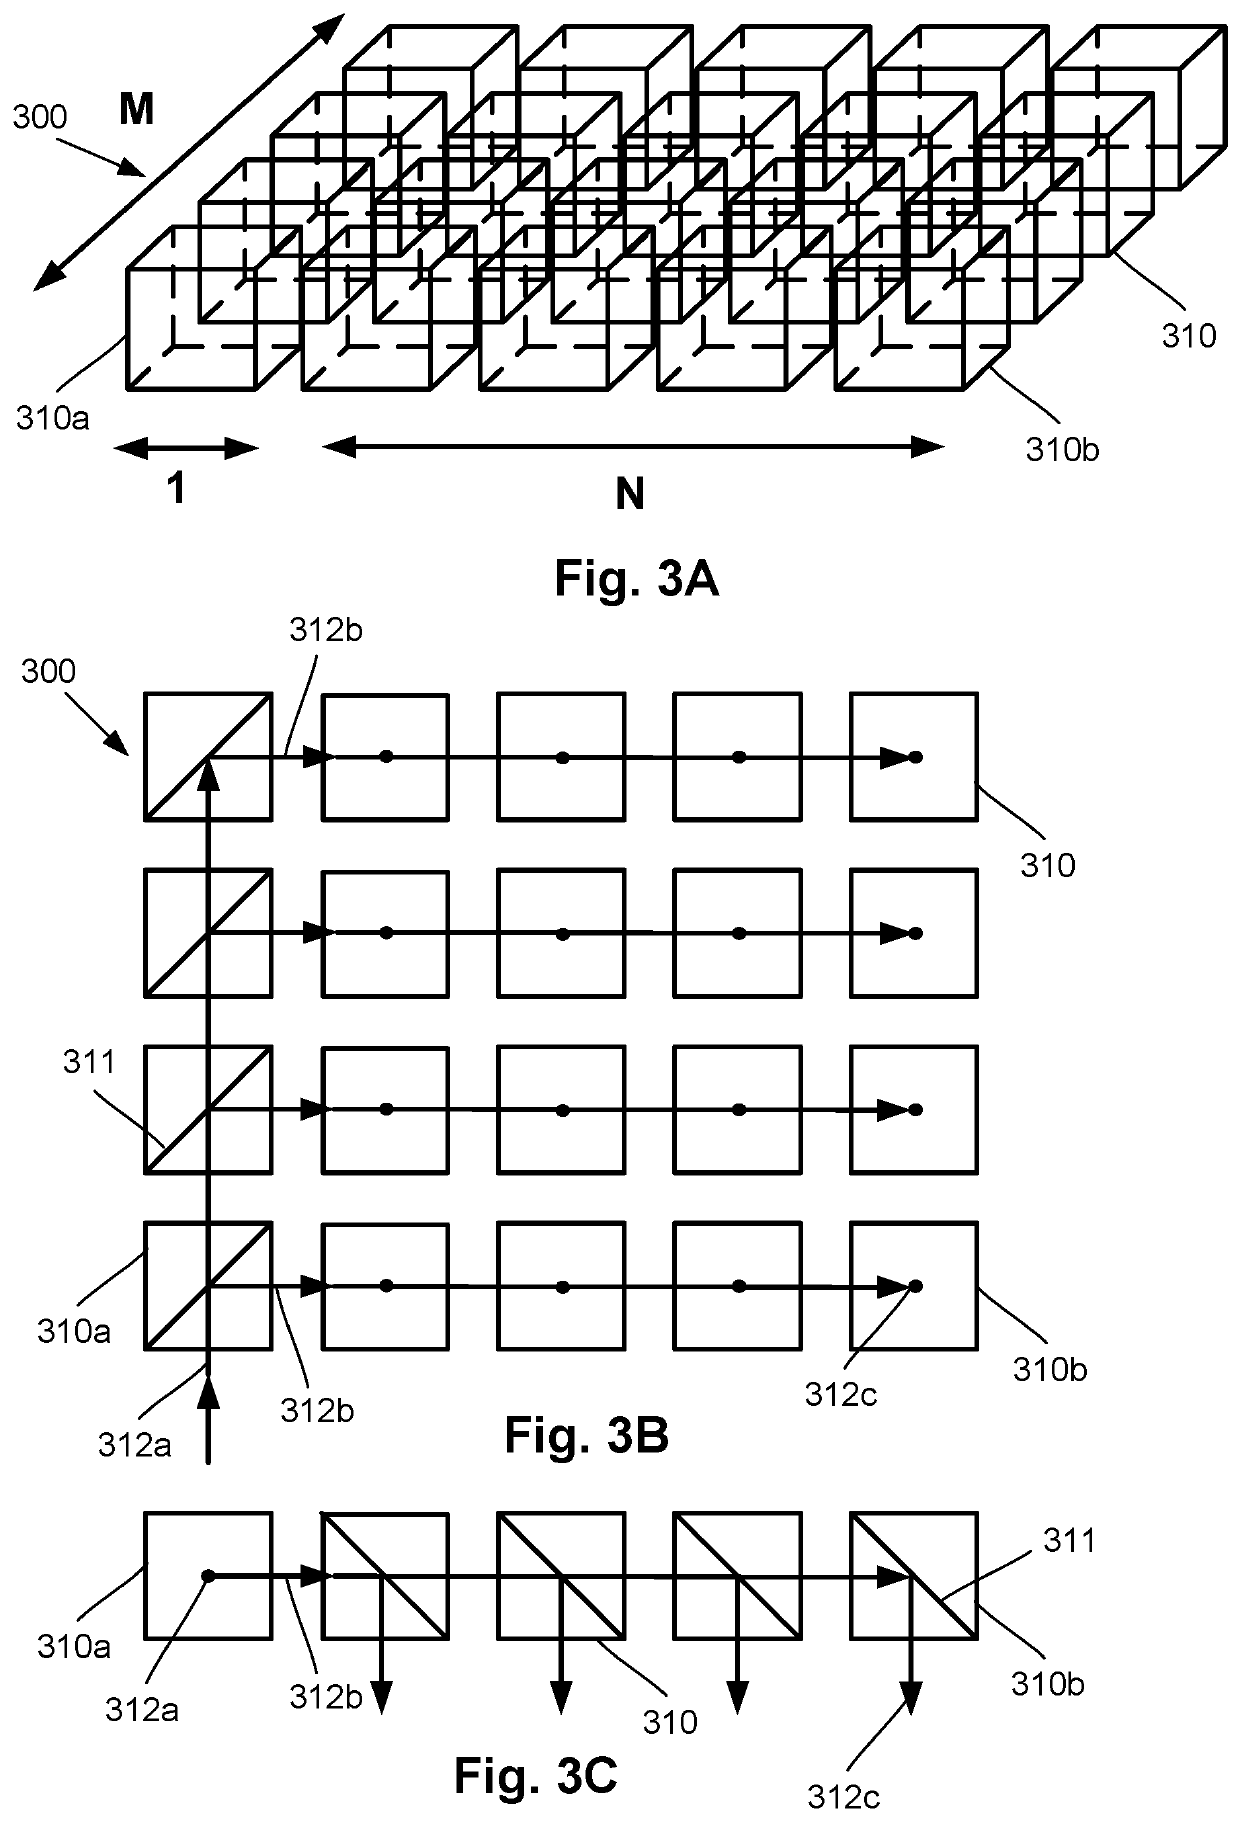 Systems and methods having an optical magnetometer array with beam splitters